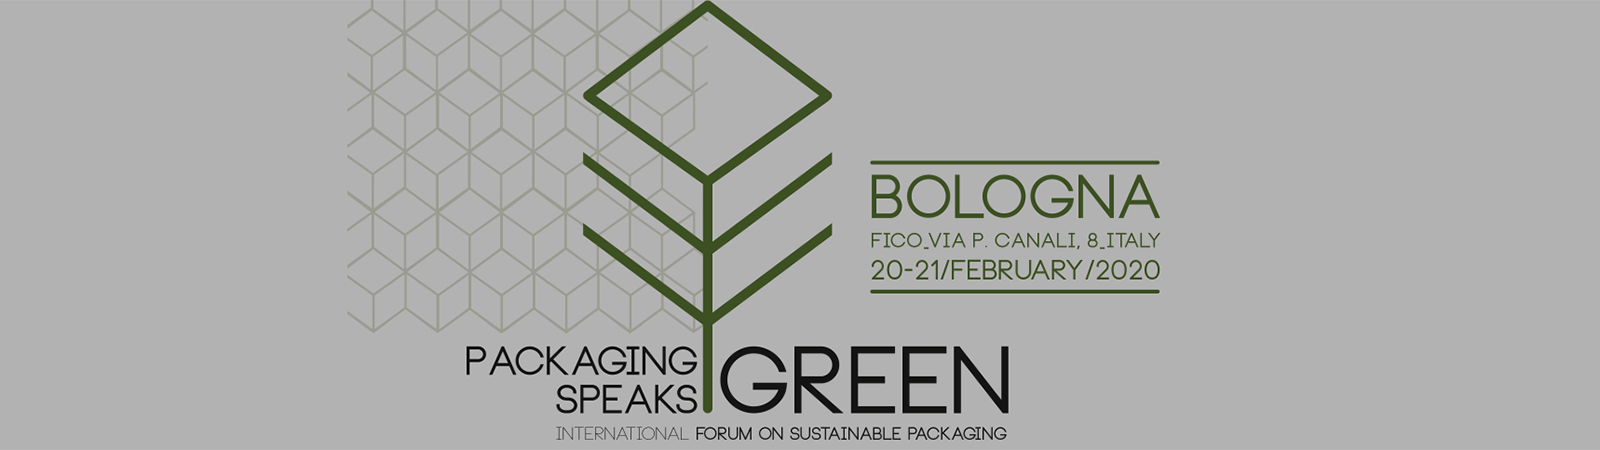 SACMI to be main sponsor of Packaging Speaks Green, Bologna, 20th - 21st February 2020